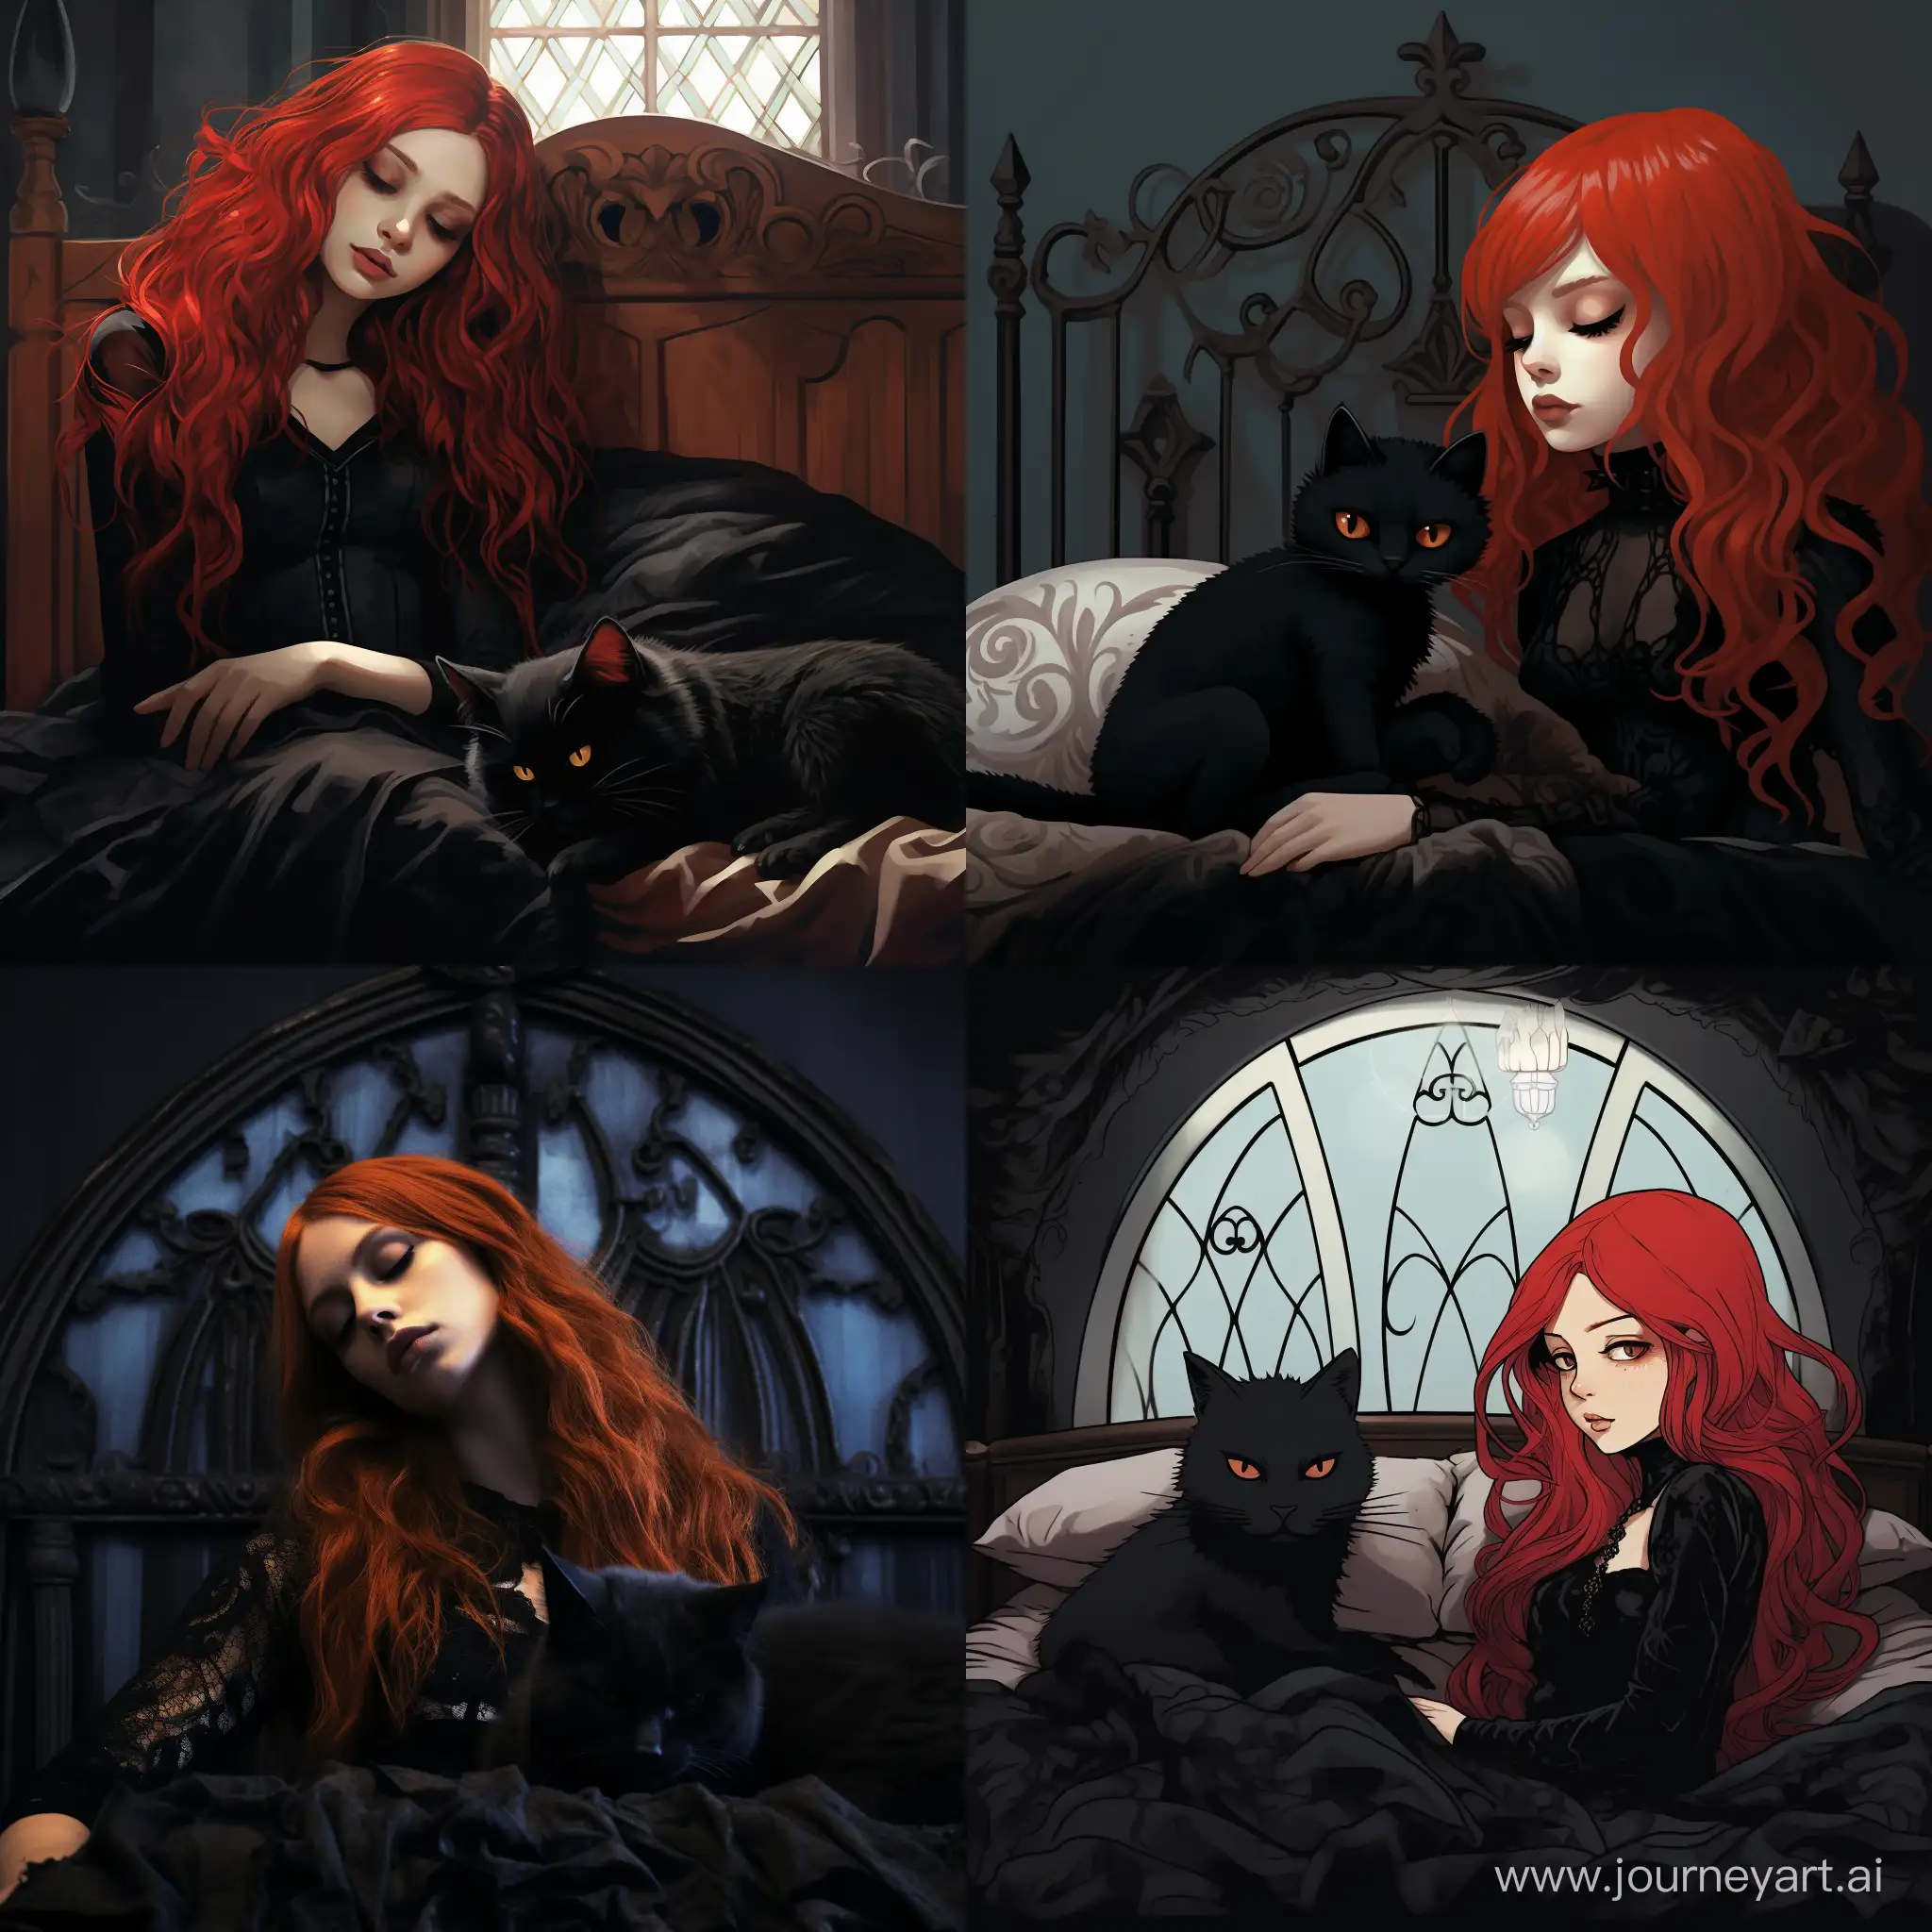 Enchanting-Gothic-Dream-RedHaired-Girl-and-Gothic-Cat-in-Cozy-Slumber